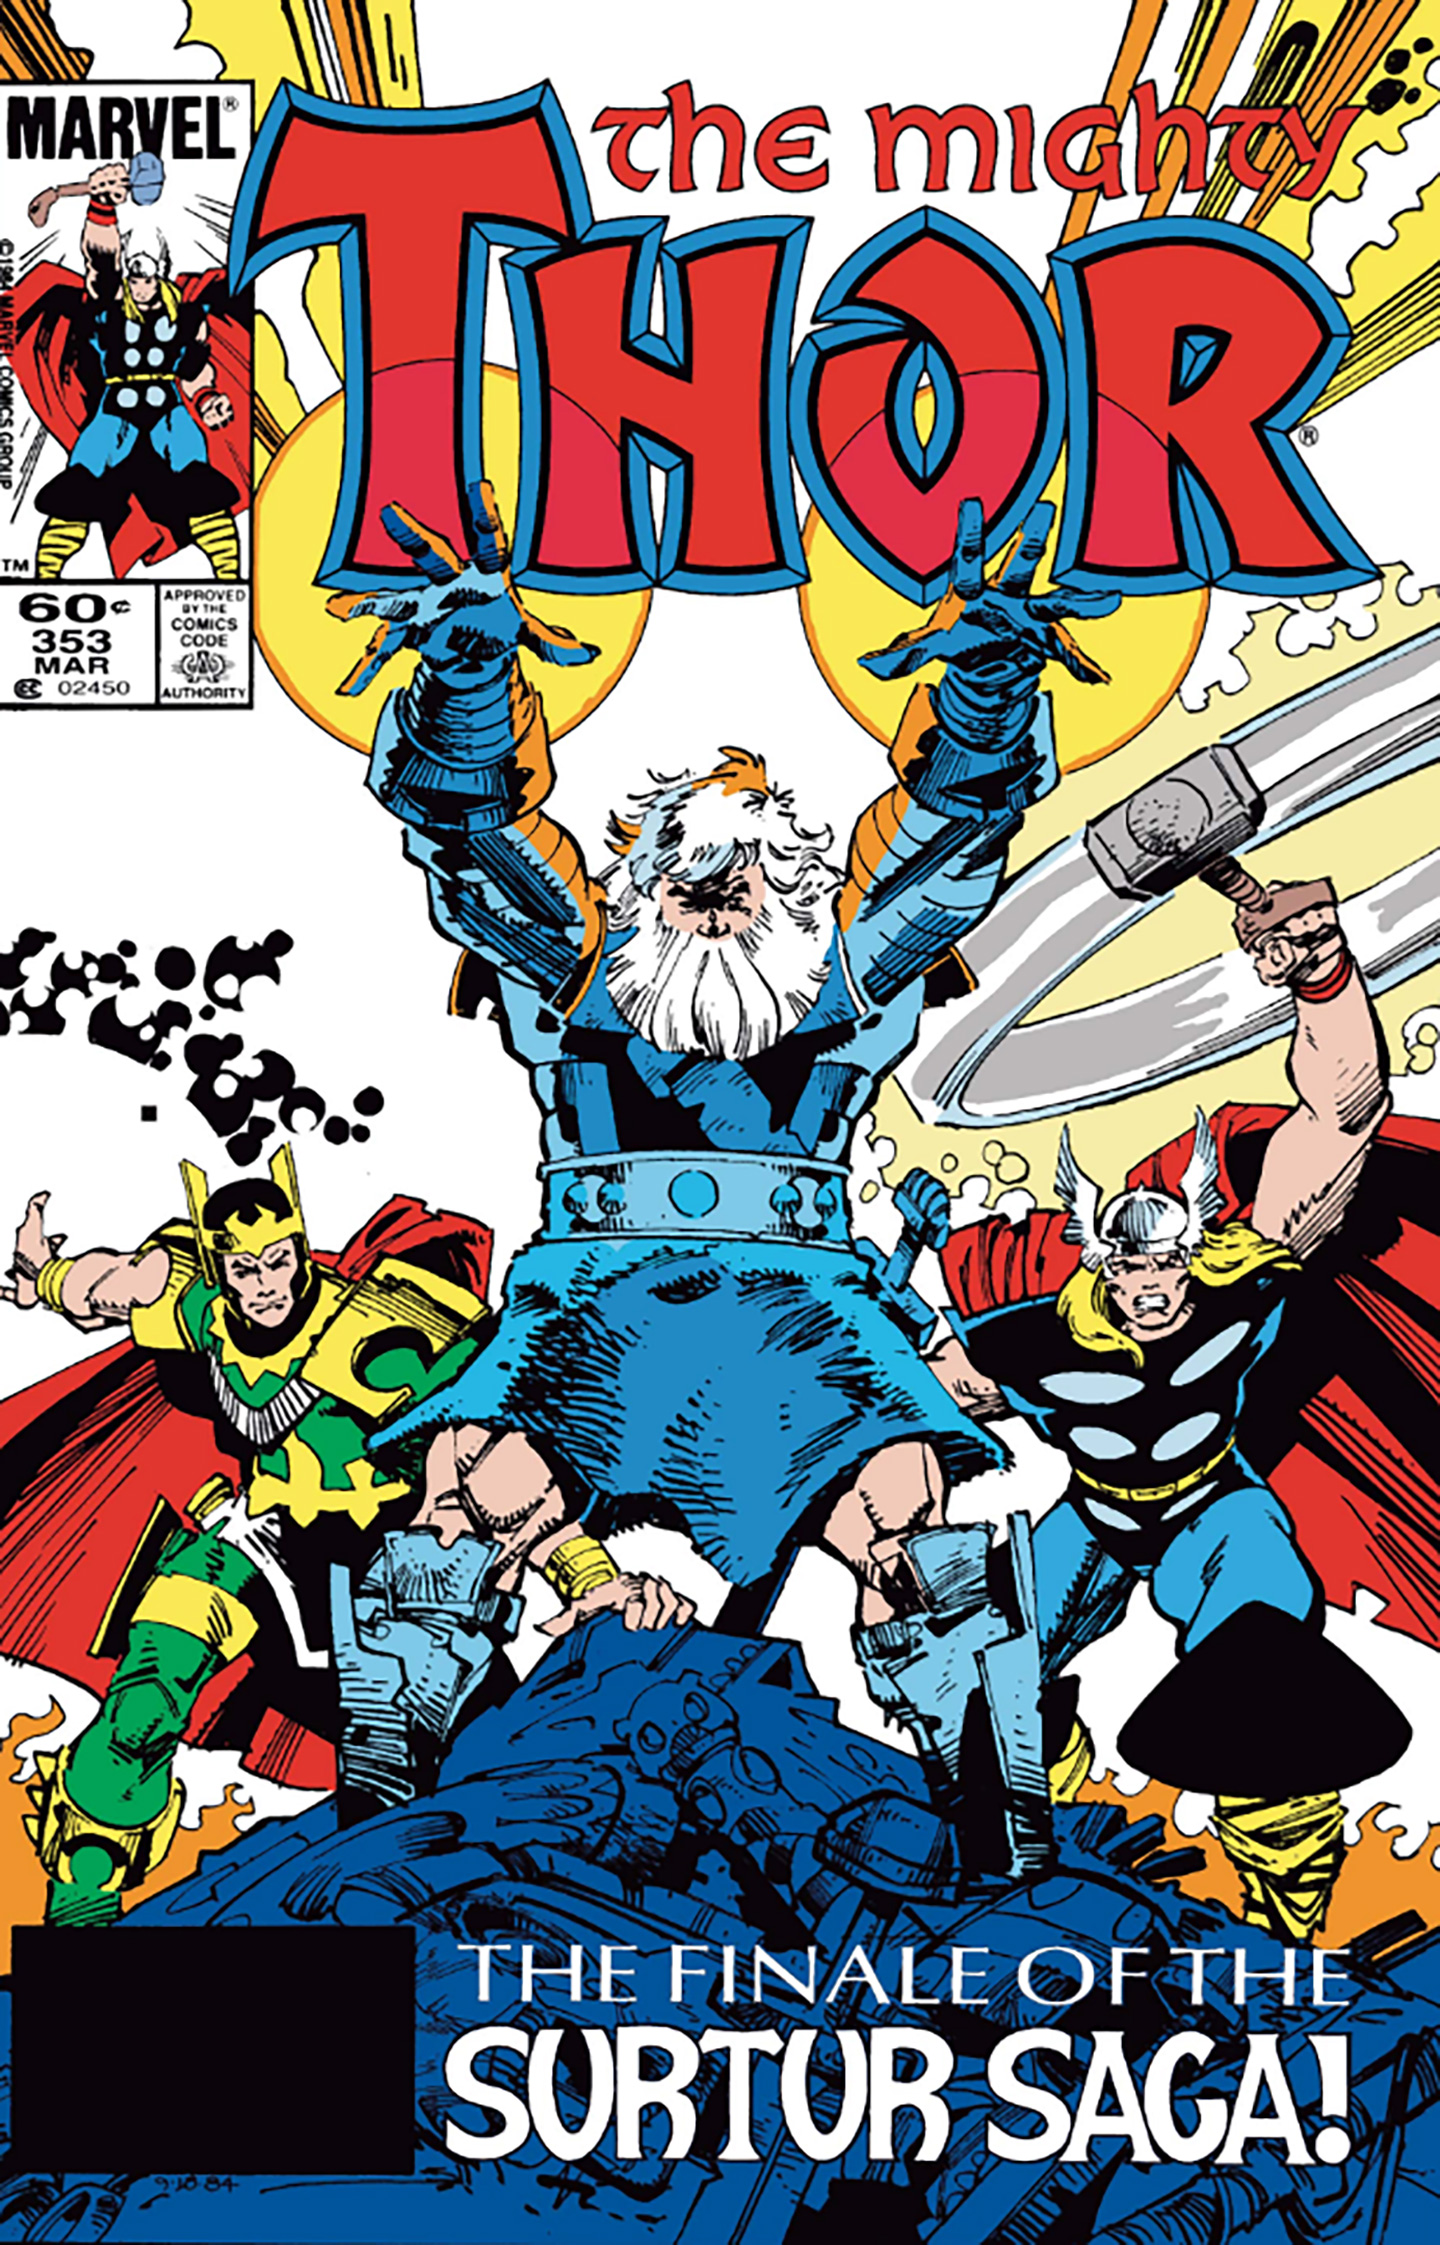 Love and Thunder' another rousing 'Thor' adventure, News